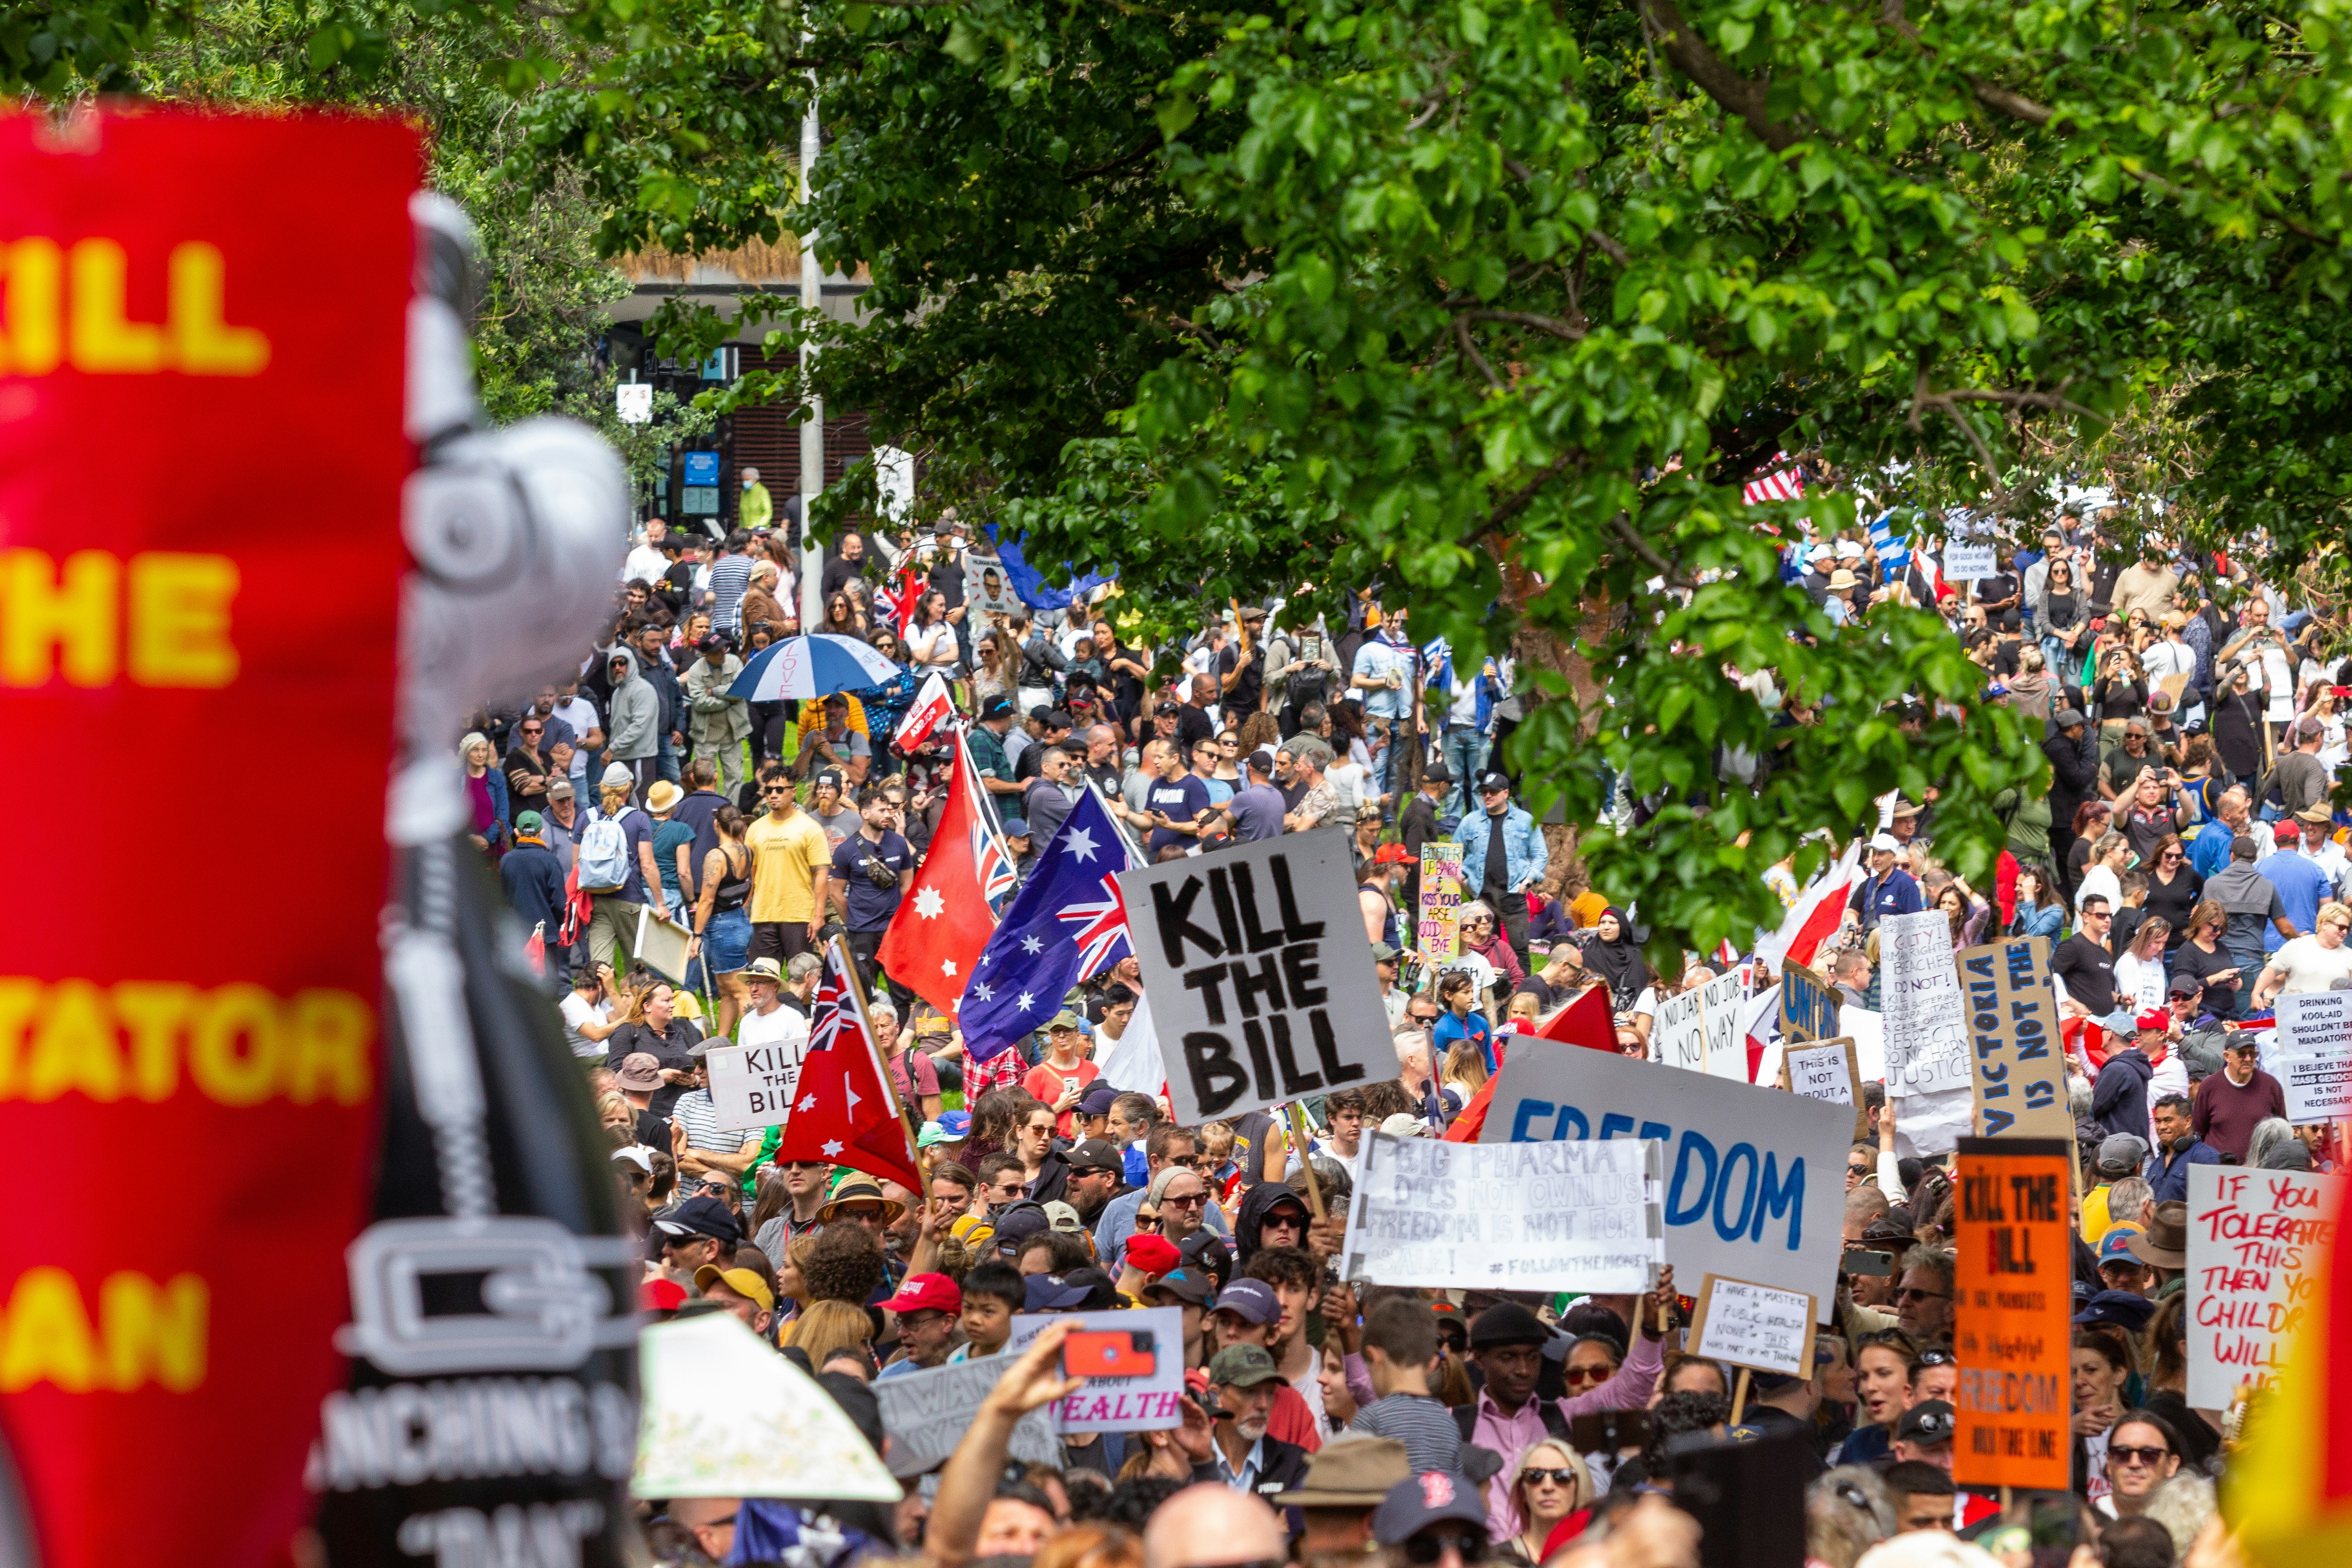 Melbourne's Freedom protests rally and march in the city November 20th 2021 - over 200,000 people marched from Parliament to the Flagstaff Gardens. A happy family friendly crowd singing and chanting 